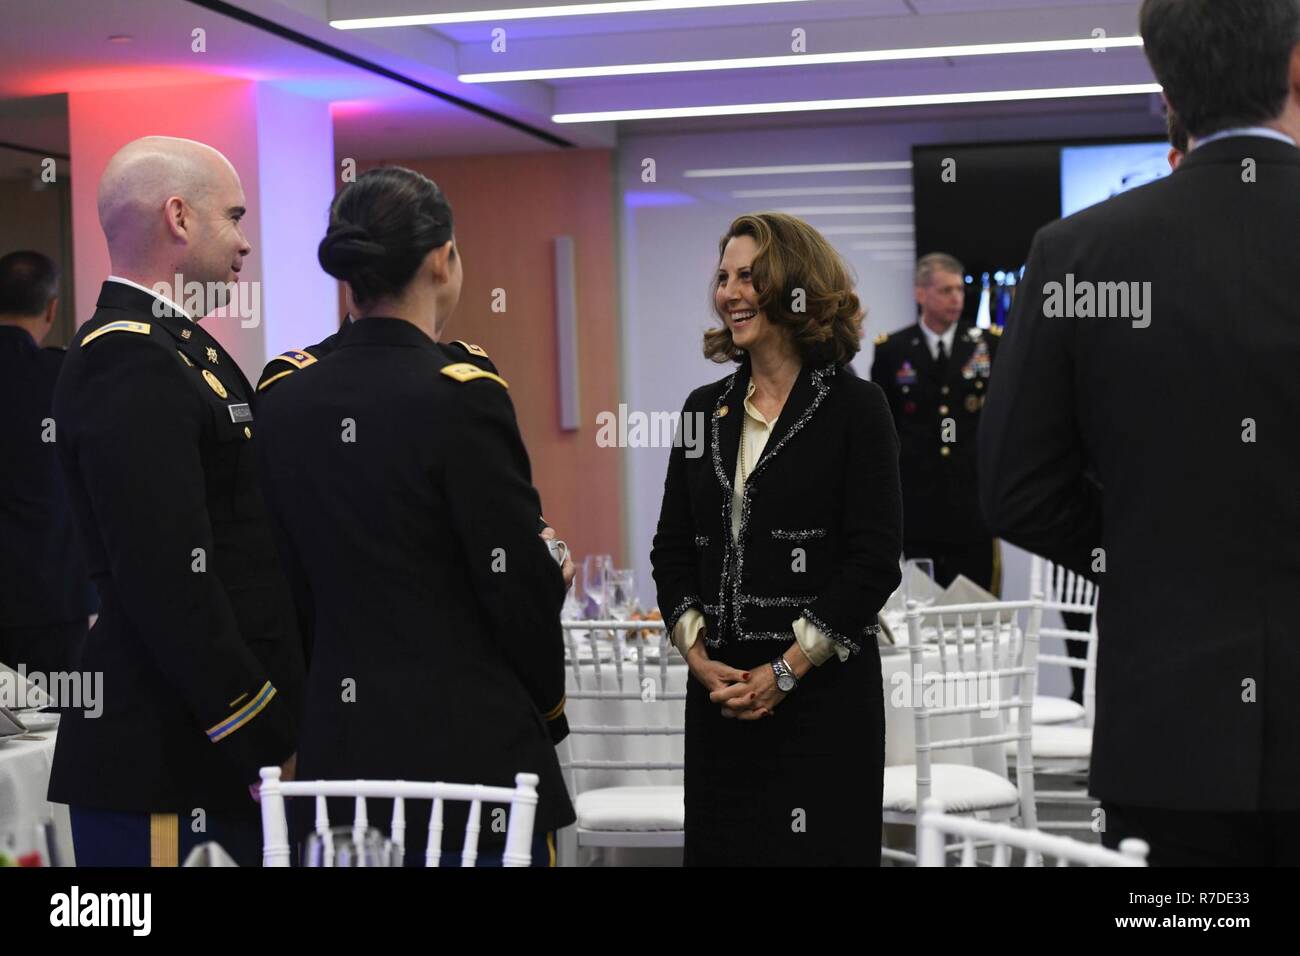 First Lady of Virginia Pamela Northam talks with District of Columbia National Guard members at the National Governors Association breakfast, Dec. 5, 2018. Following the breakfast, the DCNG members escourted the state leadership and their spouses to the state funeral of 41st U.S. President George H.W. Bush at the Washington National Cathedral Dec. 5, 2018. Stock Photo